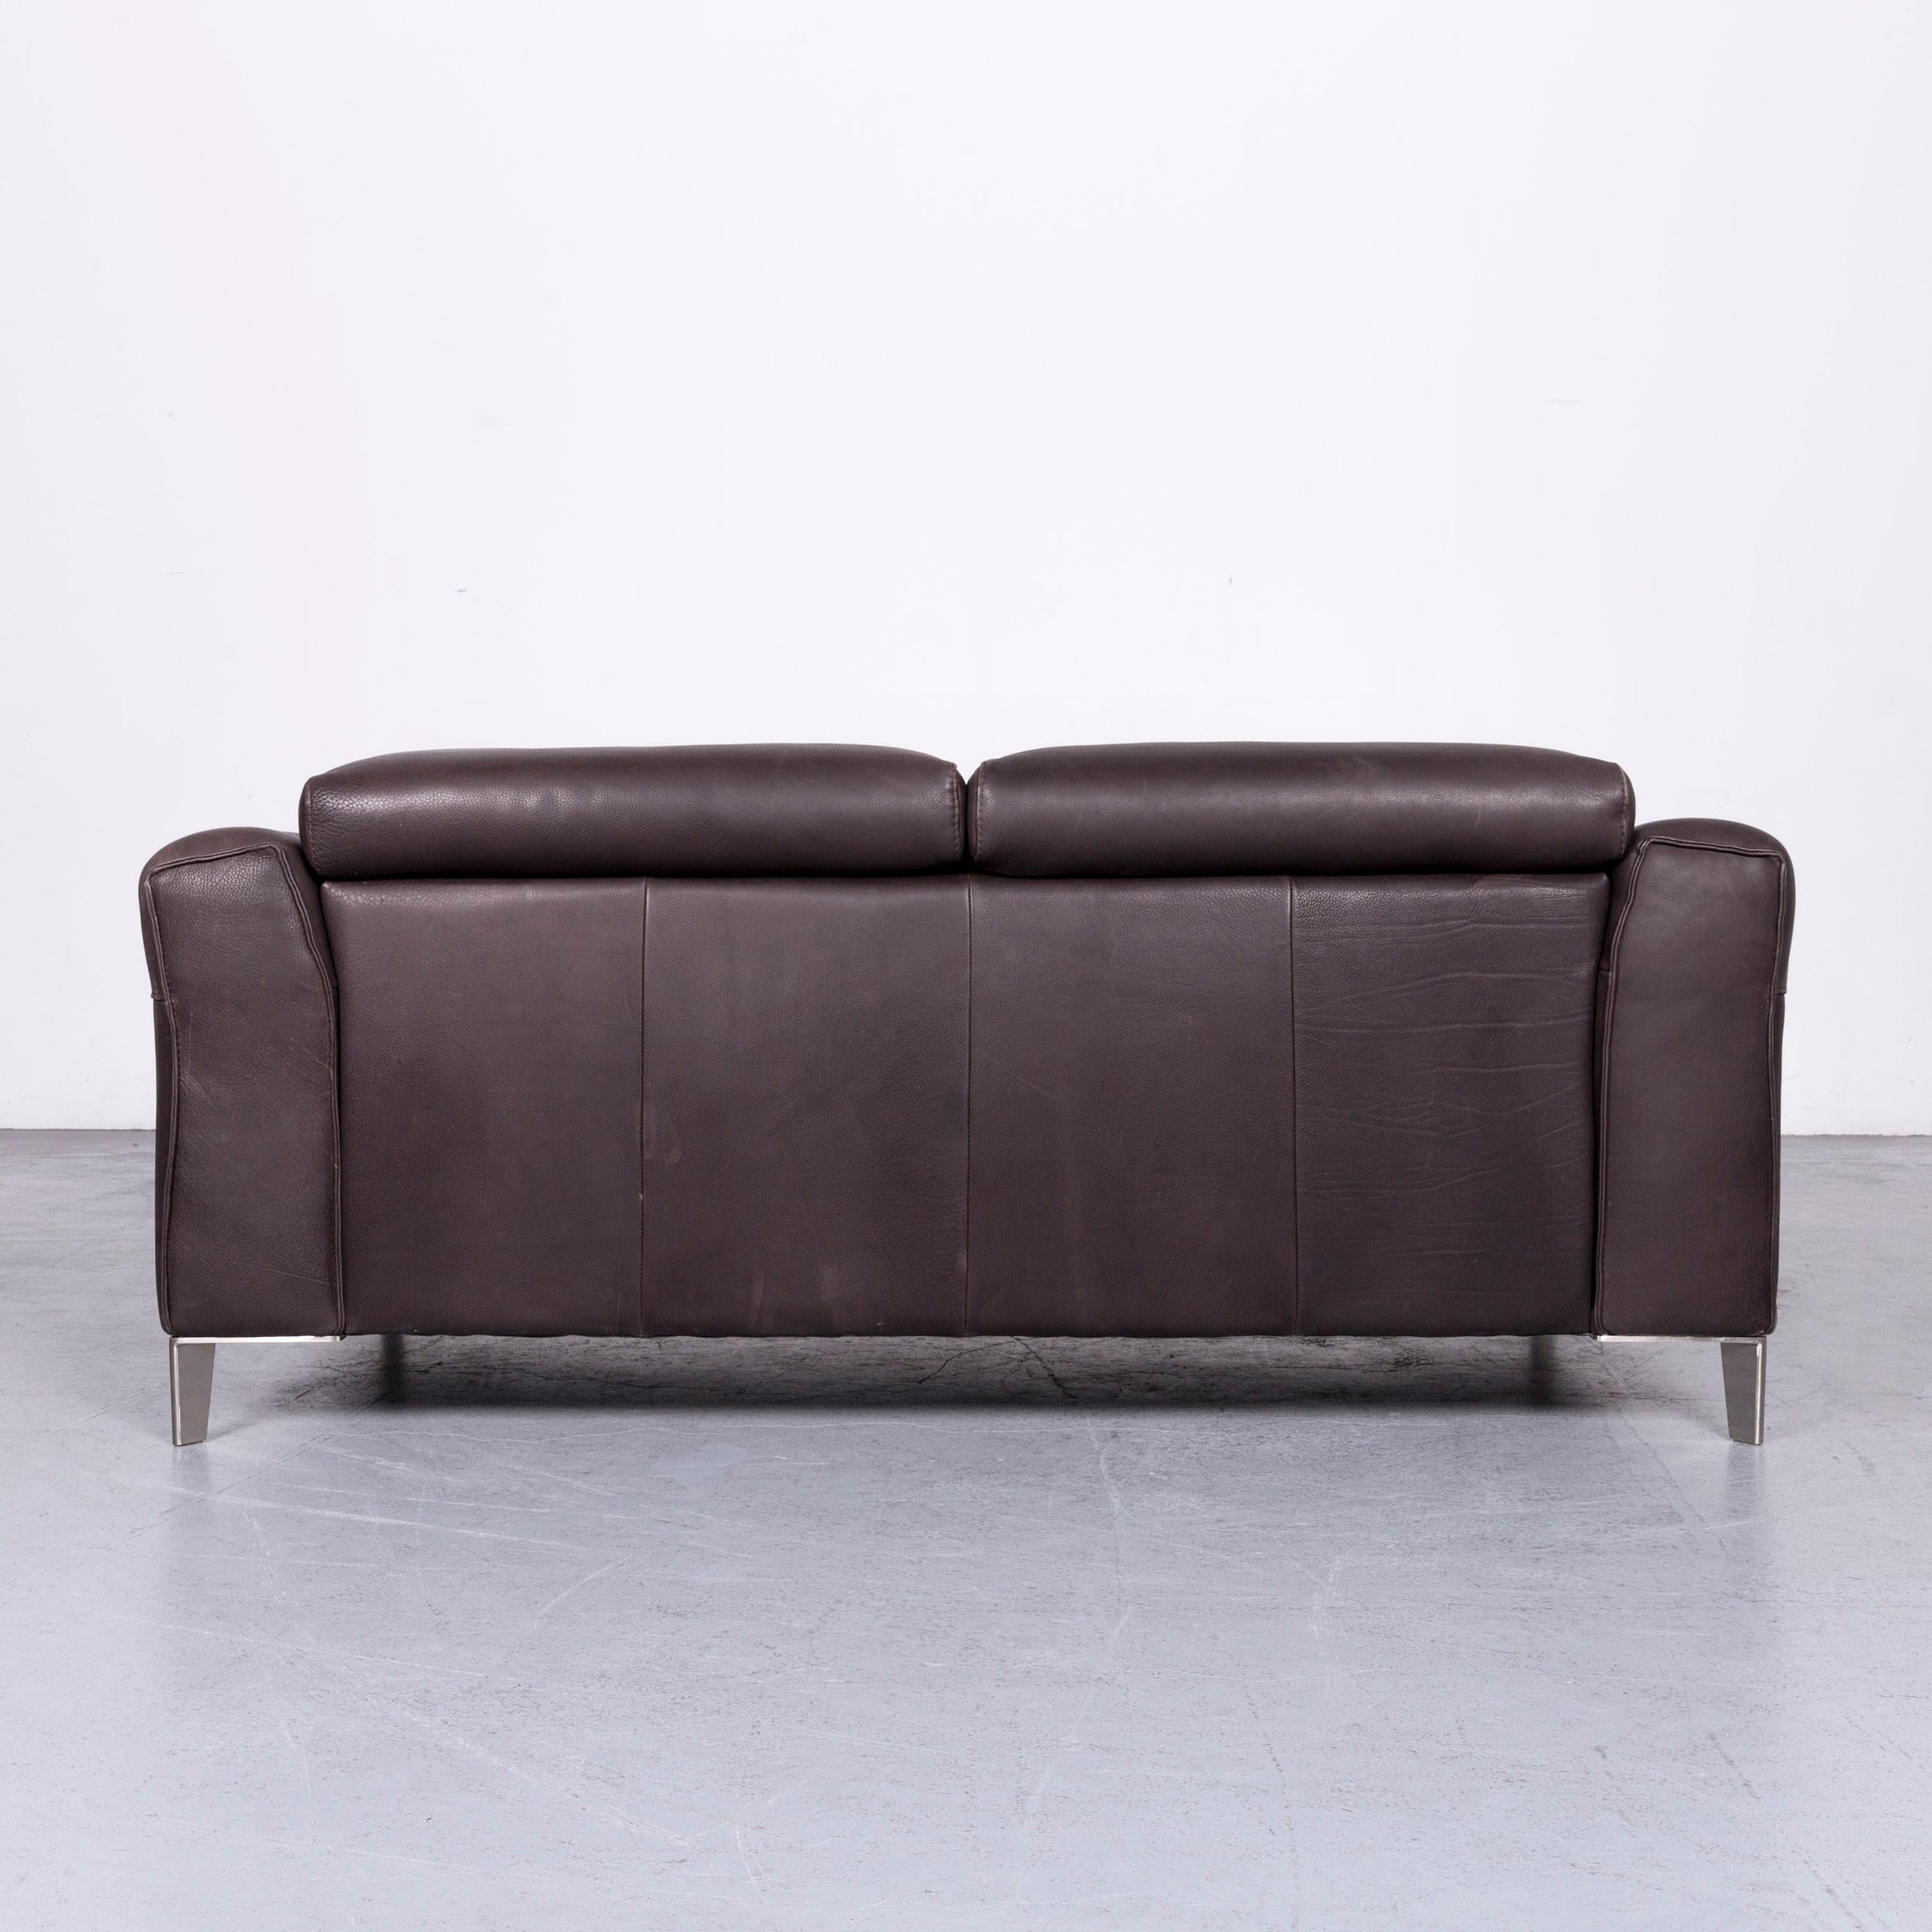 Natuzzi Designer Leather Sofa Two-Seat Couch Brown 5